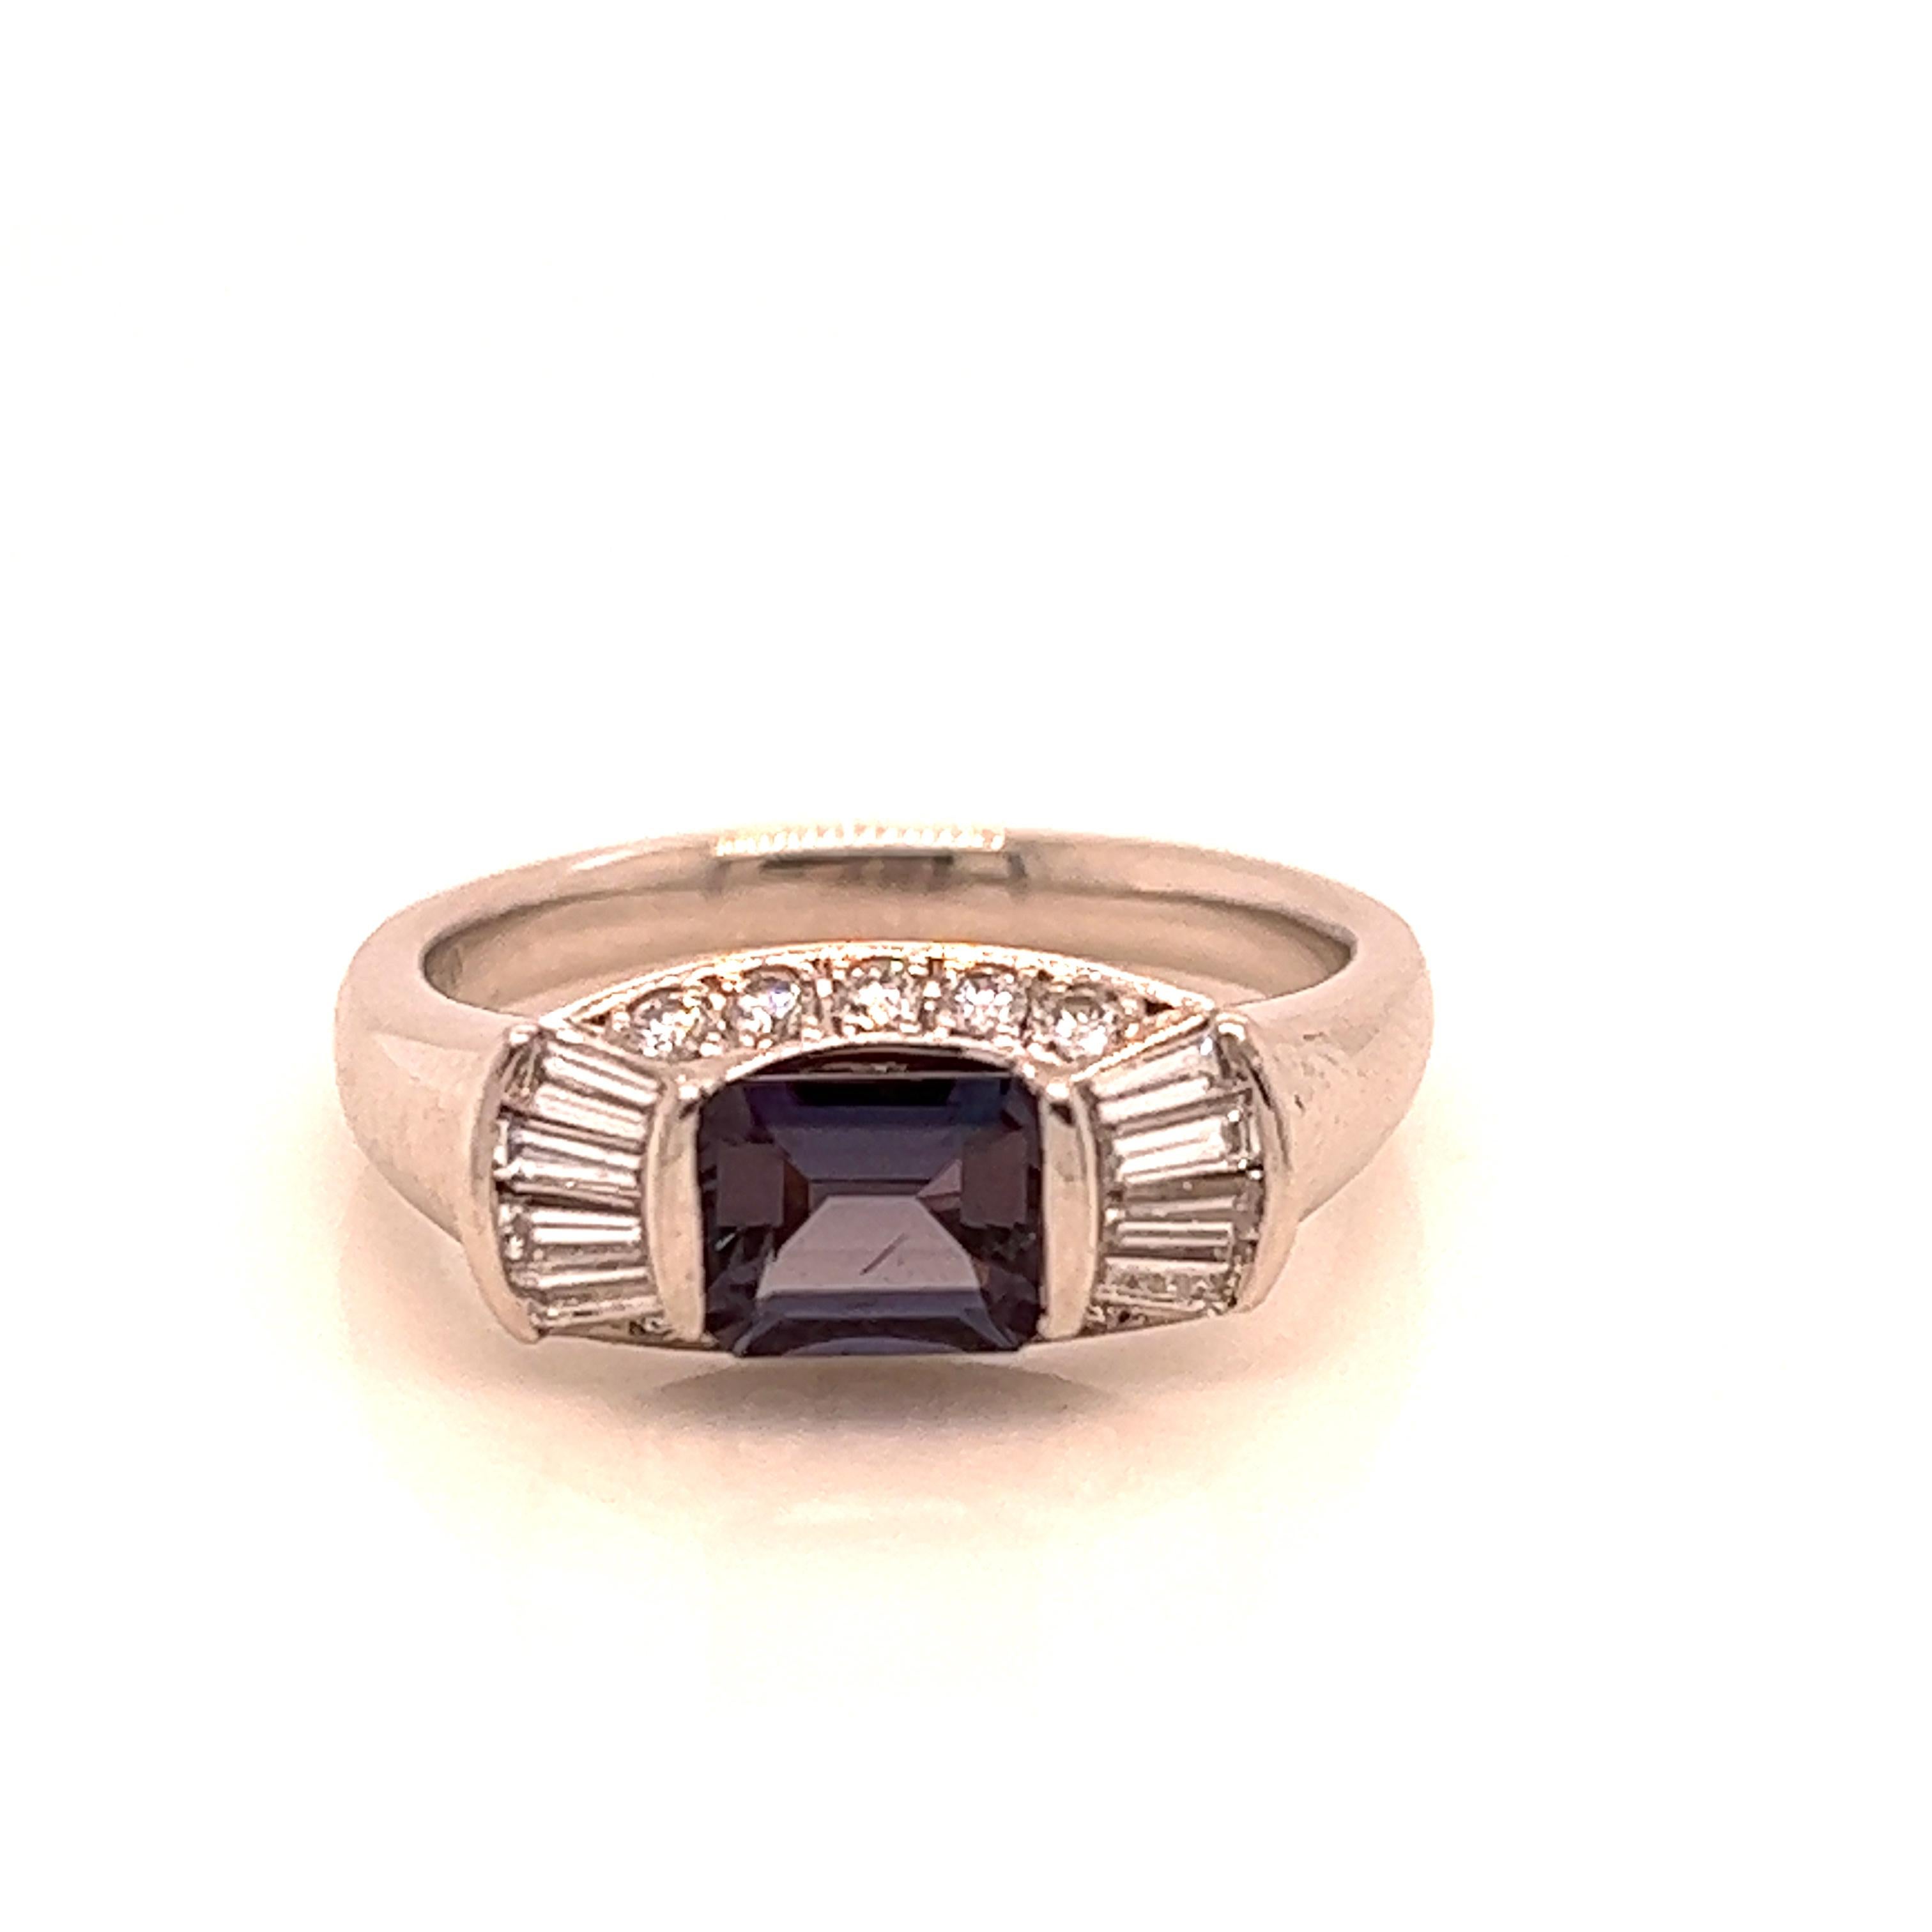 This is a gorgeous natural AAA quality emerald Alexandrite surrounded by dainty diamonds that is set in a vintage platinum setting. This ring features a natural 0.97 carat emerald alexandrite that is certified by the Gemological Institute of America